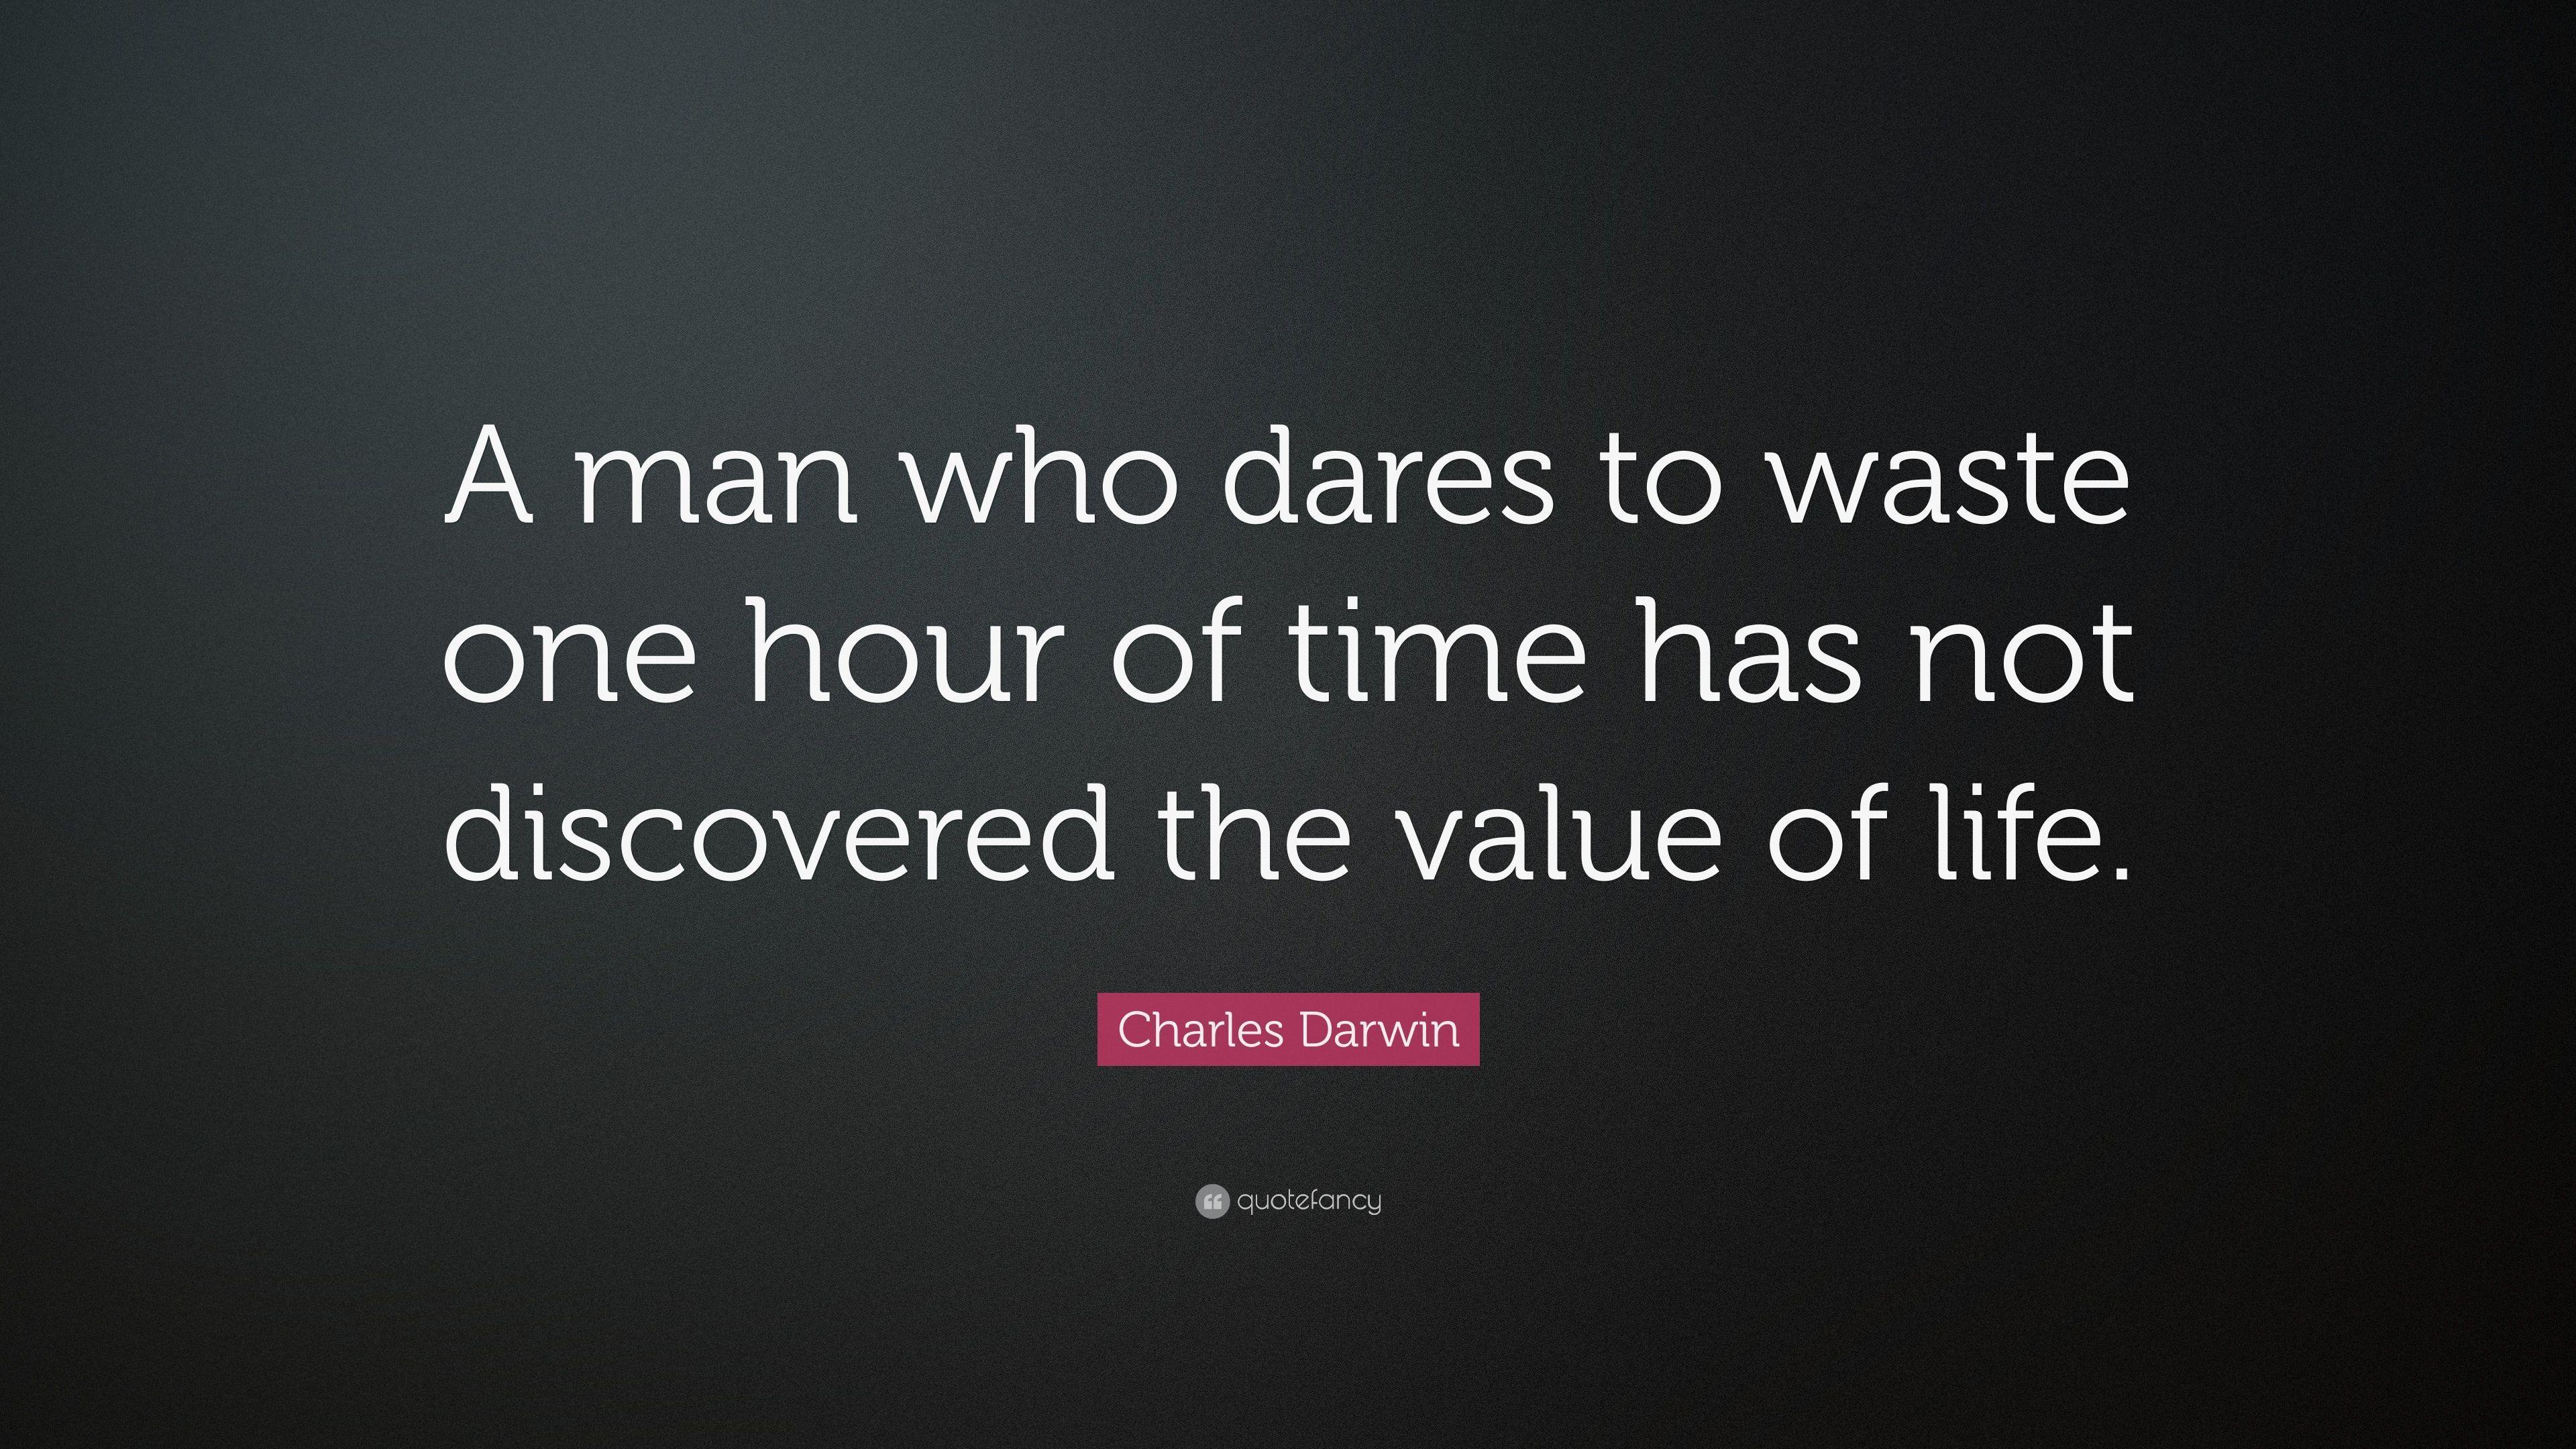 Charles Darwin Quote: “A man who dares to waste one hour of time